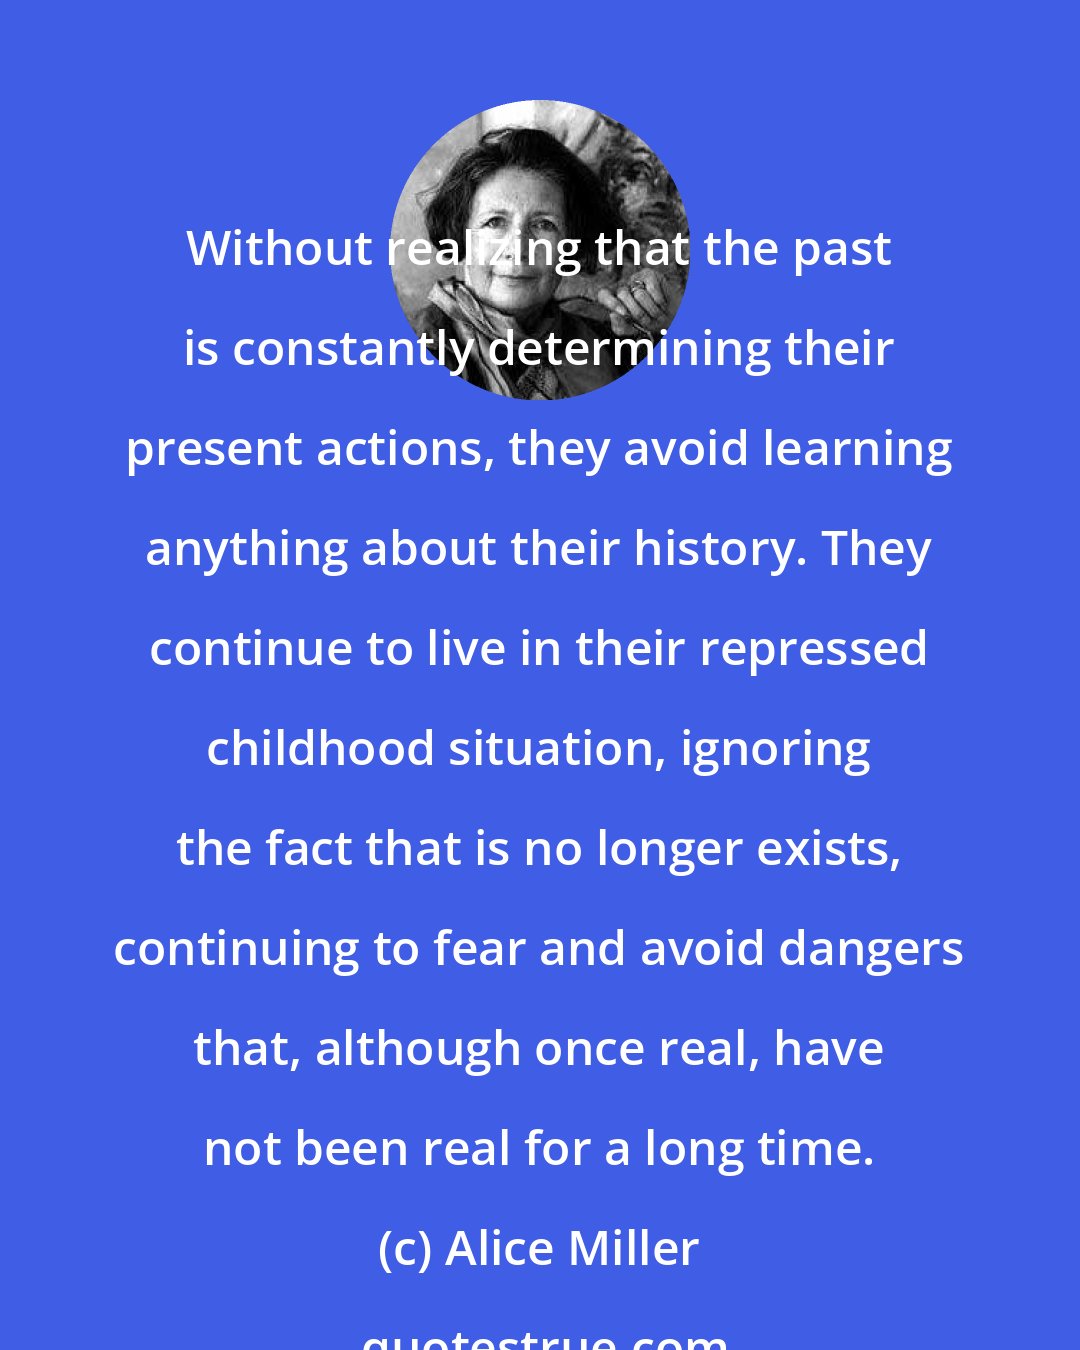 Alice Miller: Without realizing that the past is constantly determining their present actions, they avoid learning anything about their history. They continue to live in their repressed childhood situation, ignoring the fact that is no longer exists, continuing to fear and avoid dangers that, although once real, have not been real for a long time.